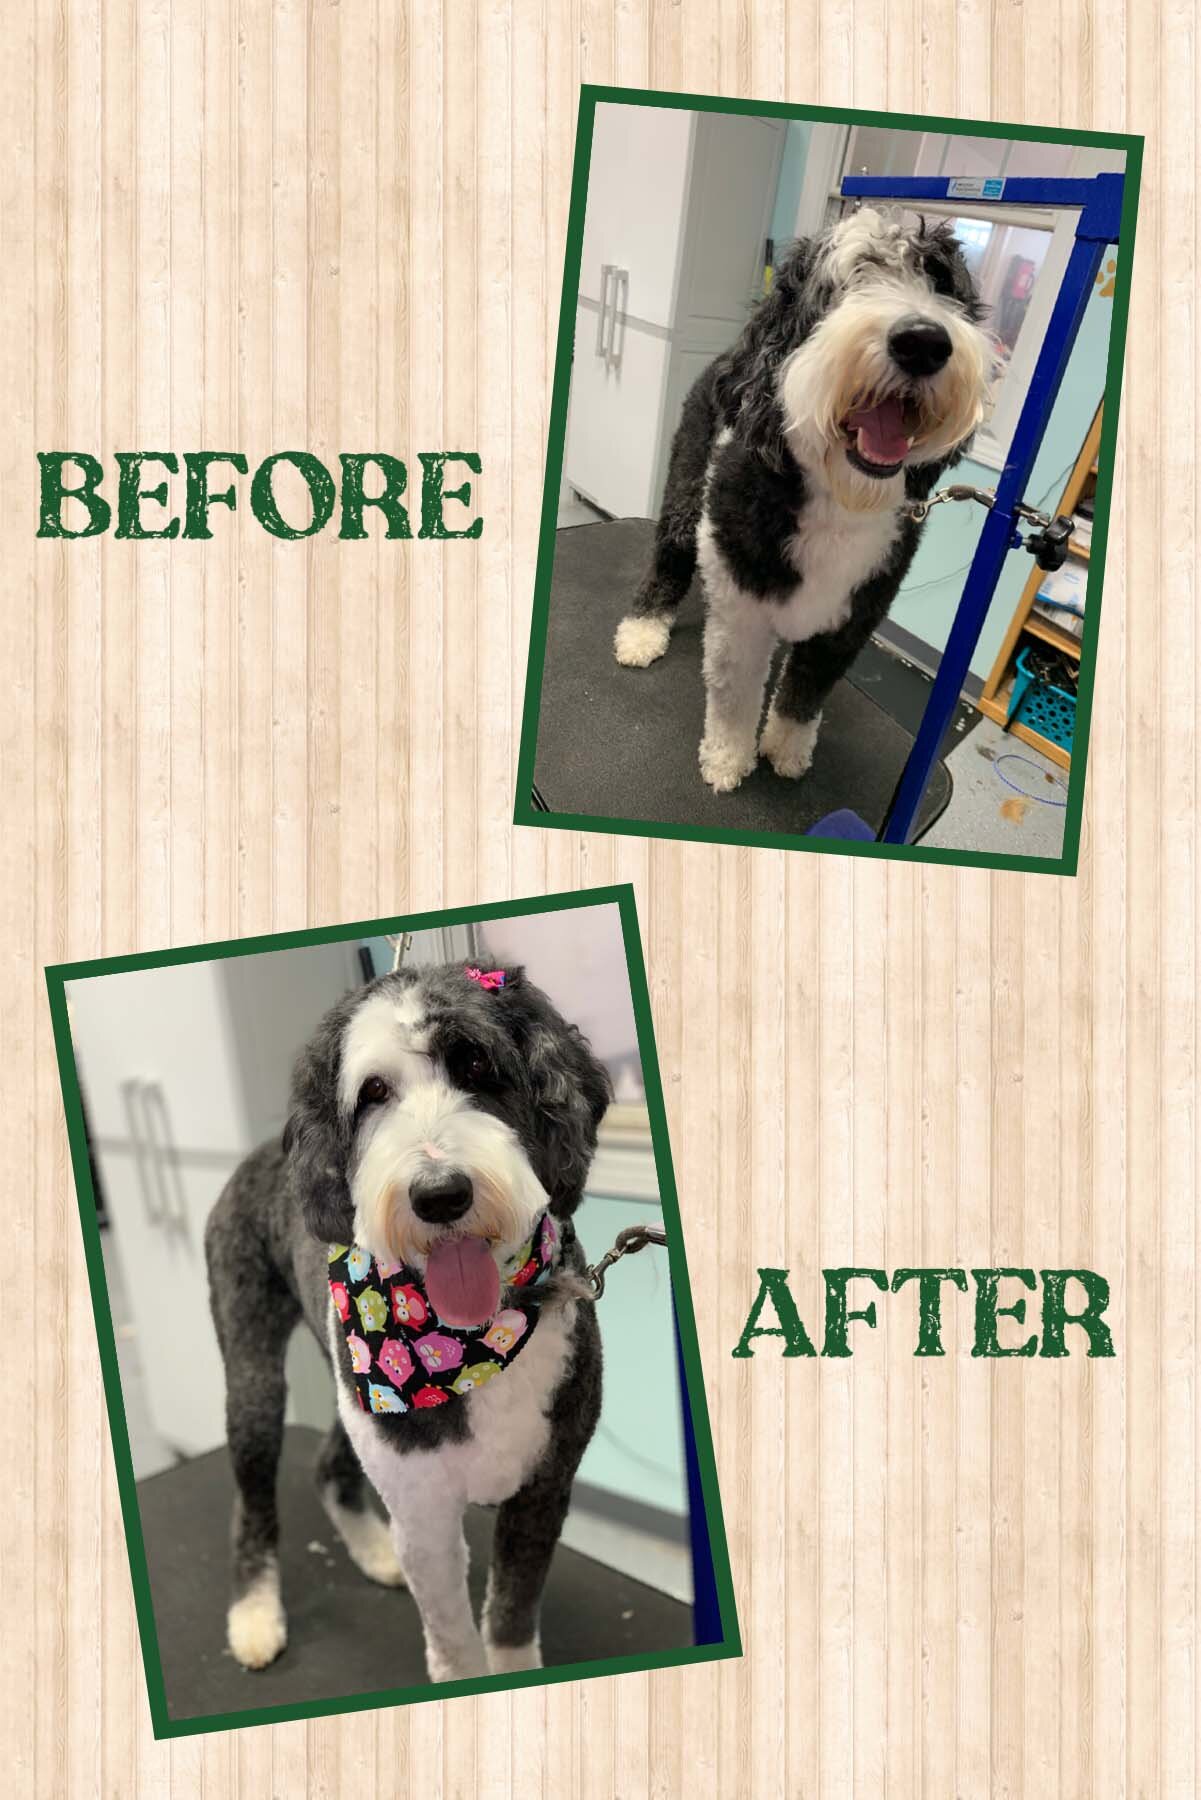 Bougie's before and after photos